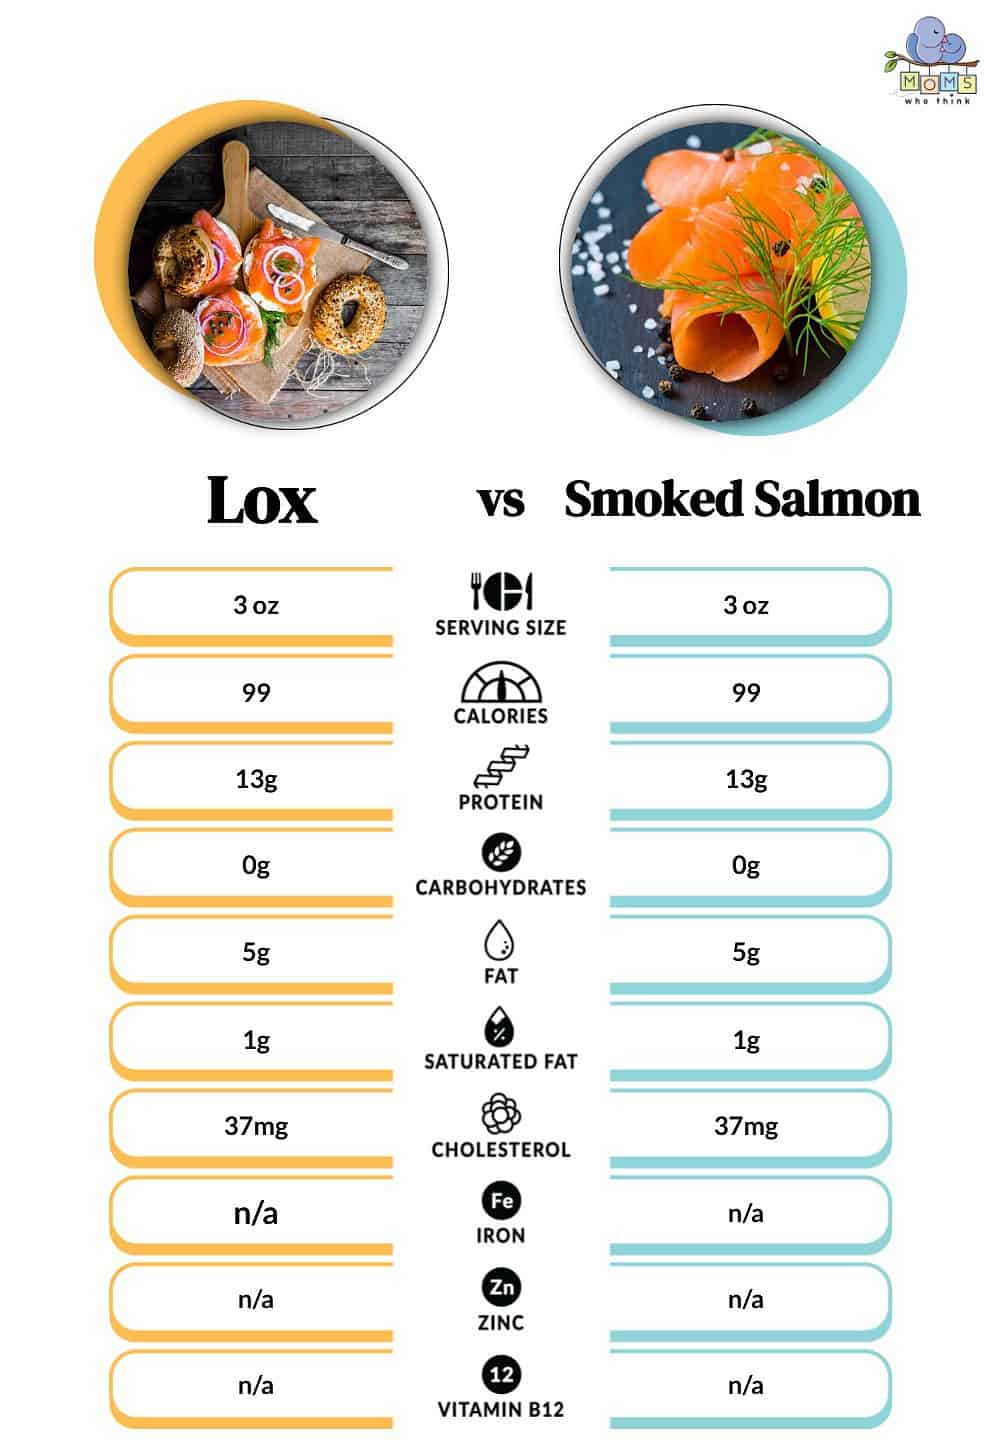 Lox vs Smoked Salmon Nutritional Facts